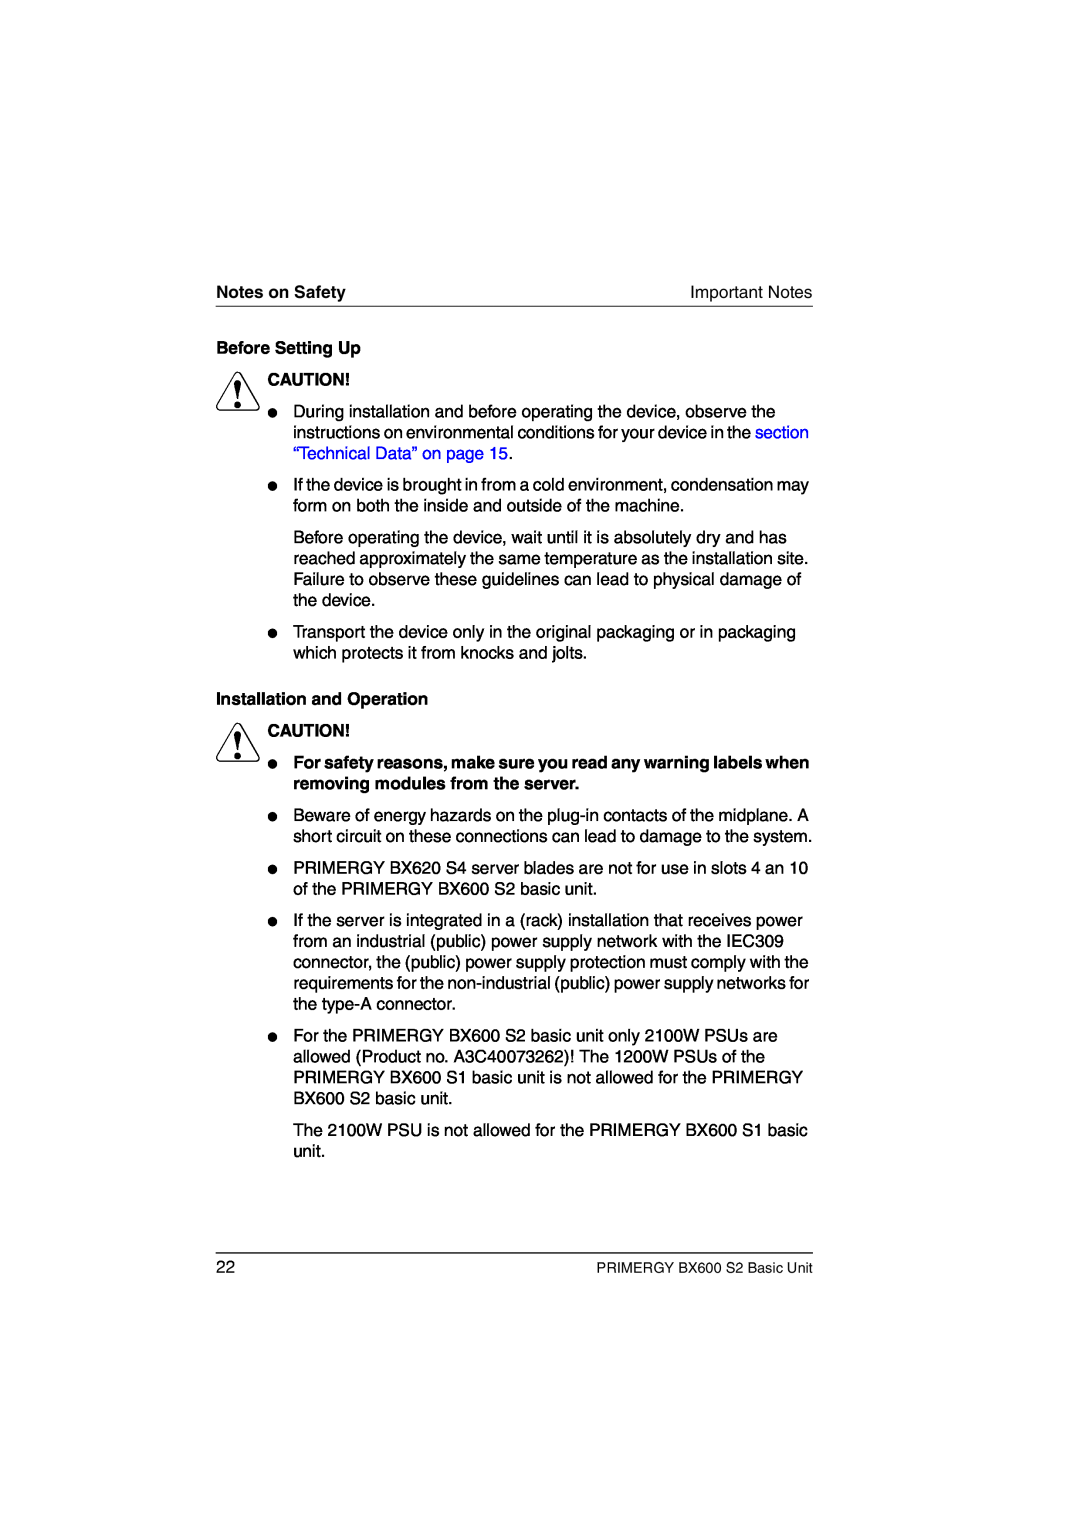 Fujitsu BX600 S2 manual Notes on Safety, Before Setting Up V CAUTION, Installation and Operation V CAUTION 